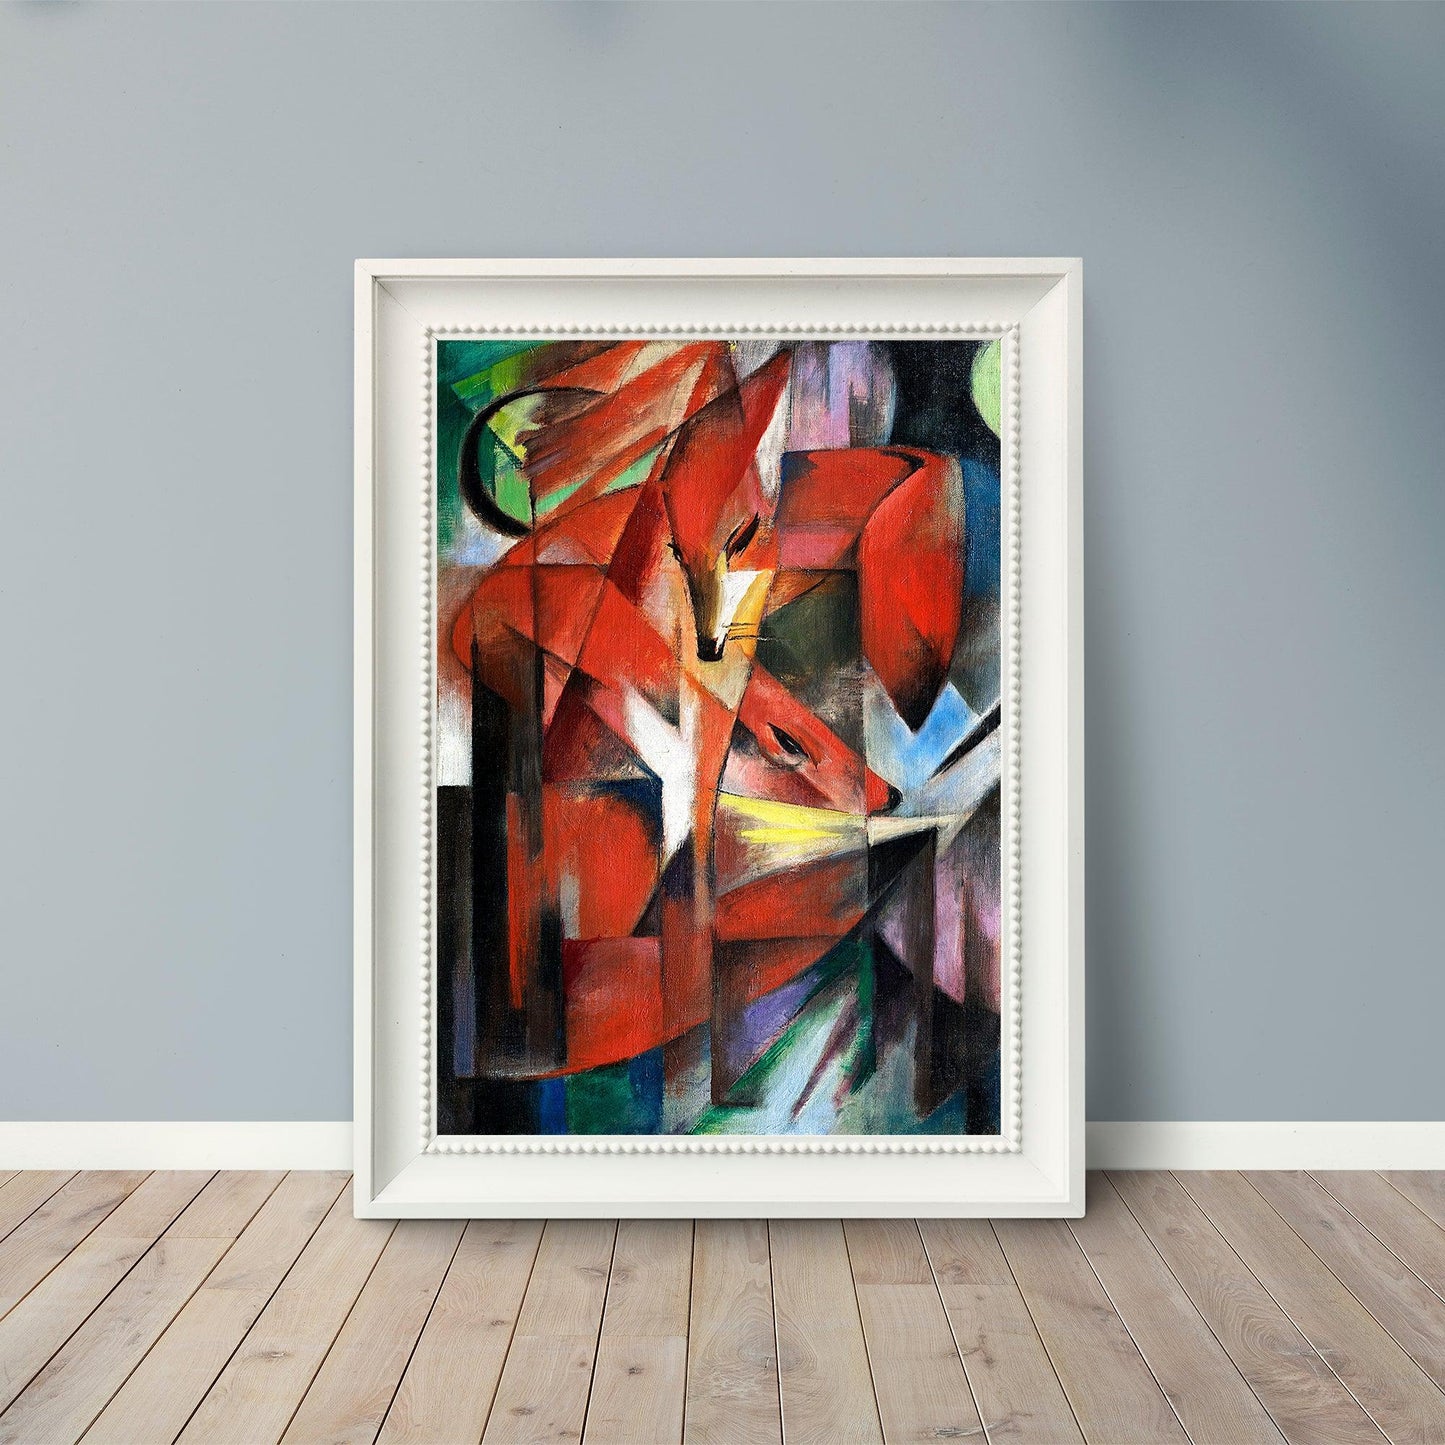 The Foxes - 1913 - Franz Marc - Fine Art Print - Classic Posters